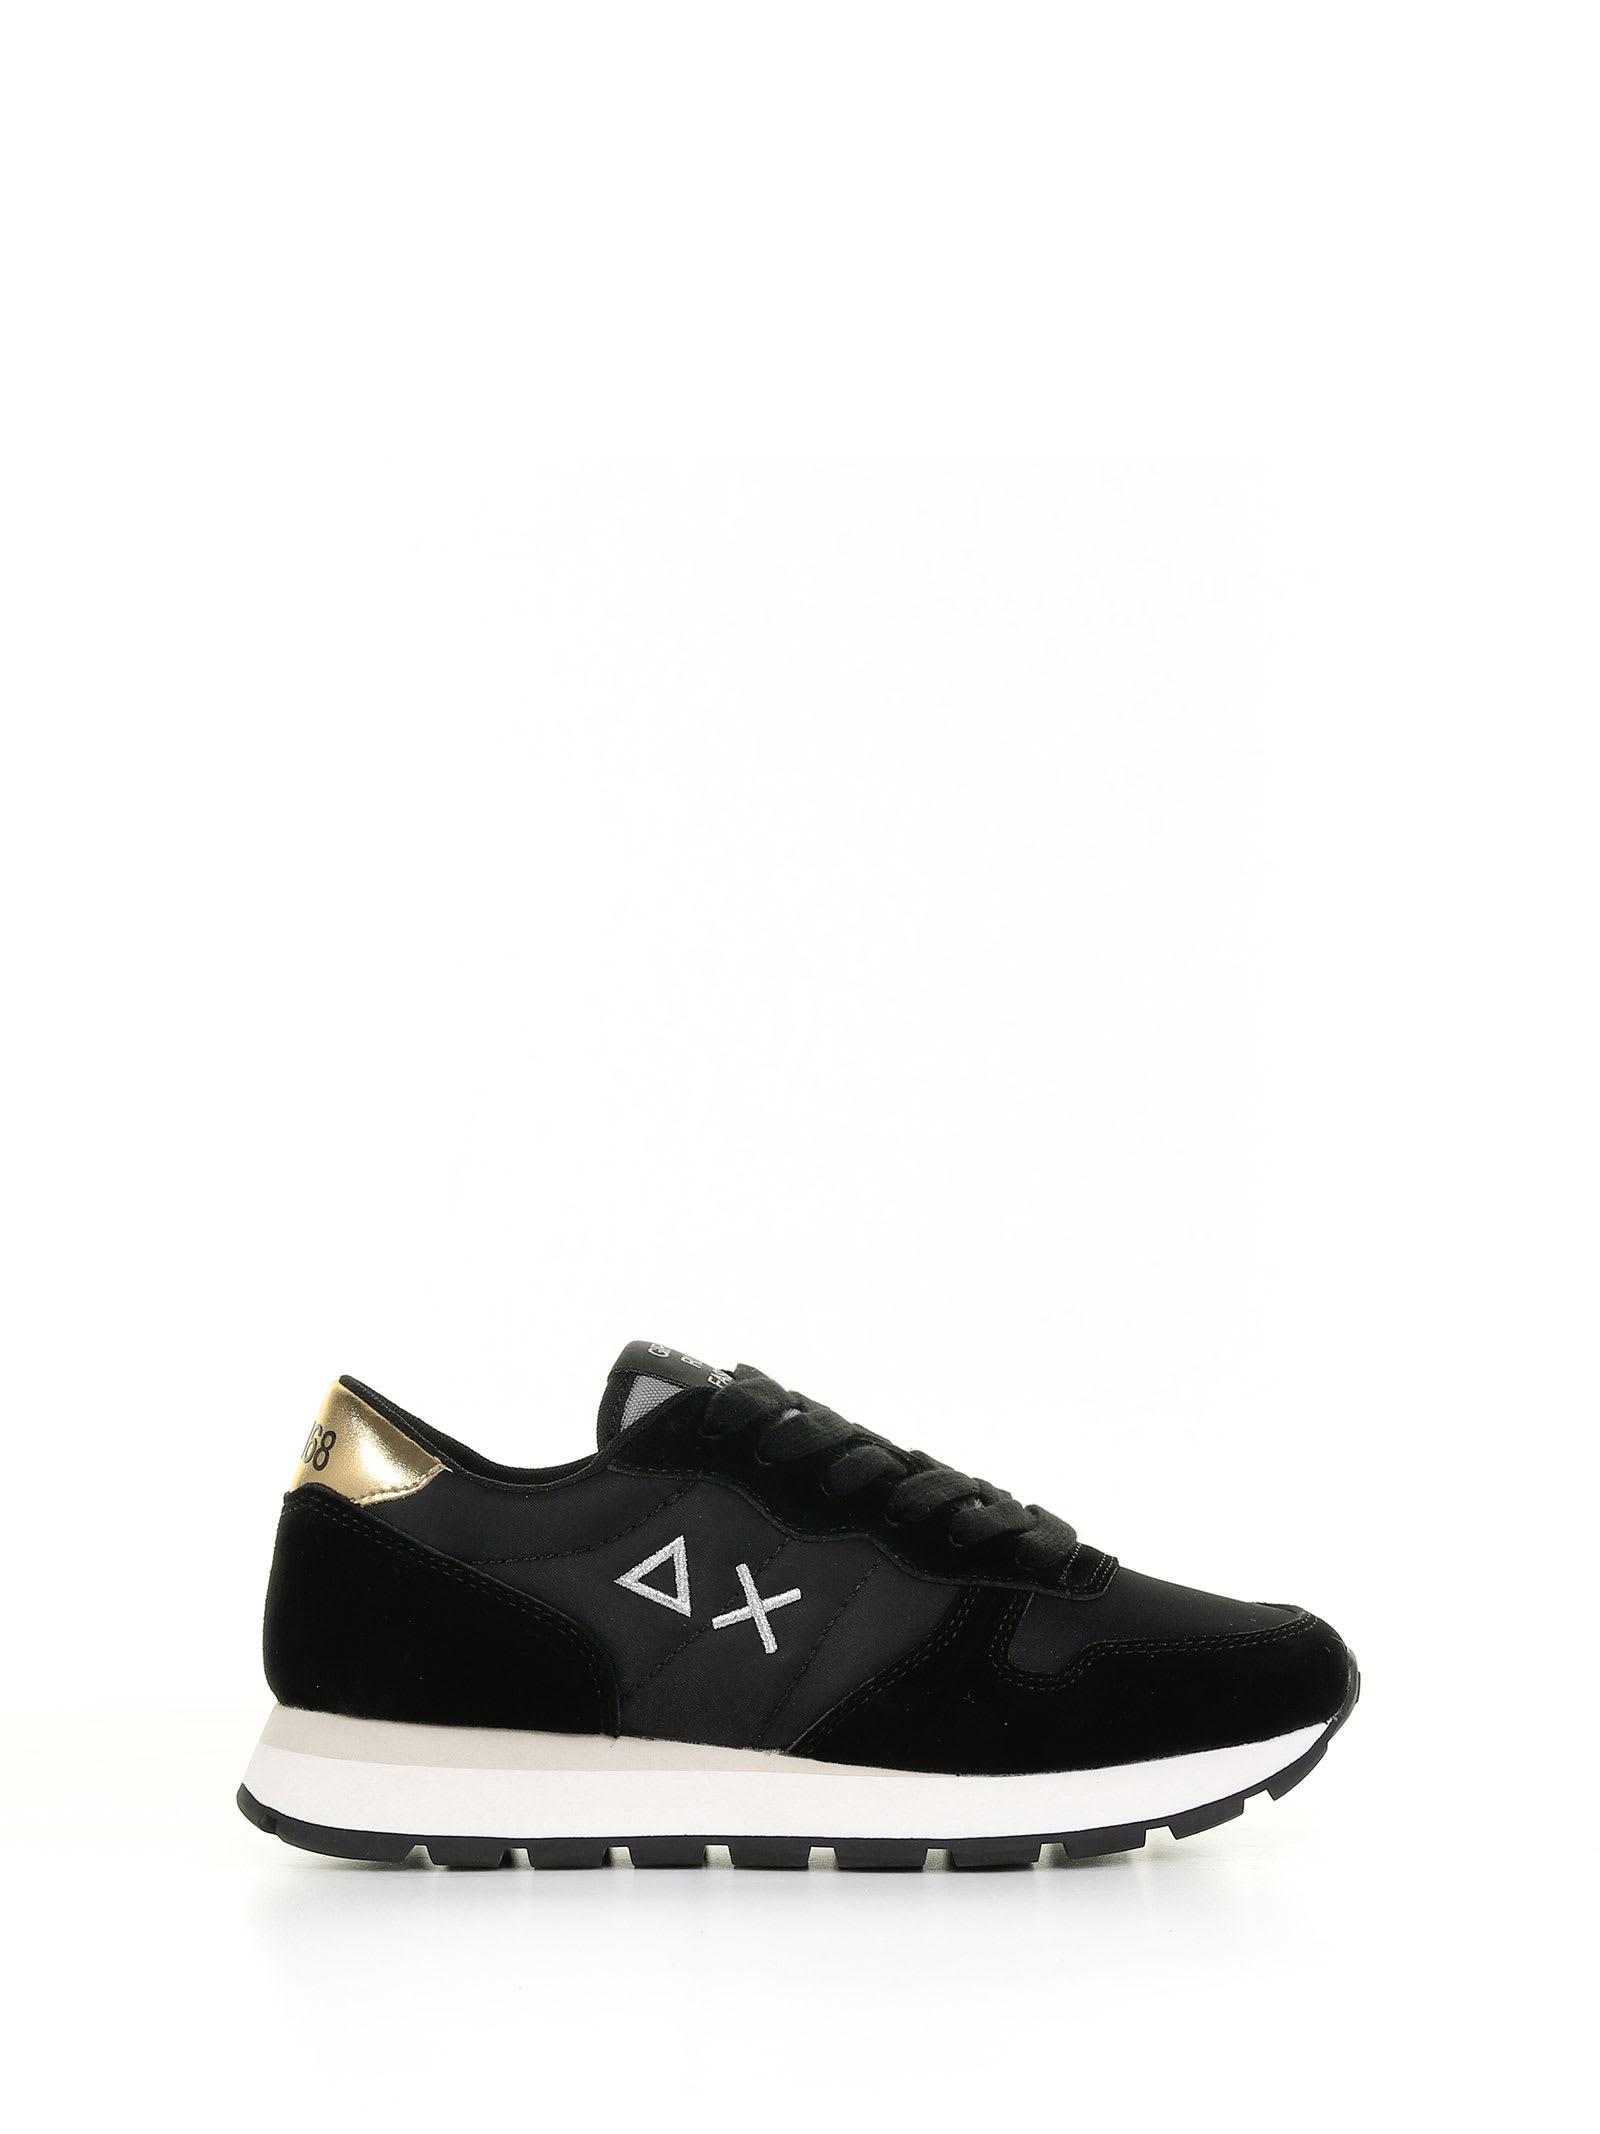 Sun 68 Ally Gold Sneaker With Contrasting Logo in Black | Lyst